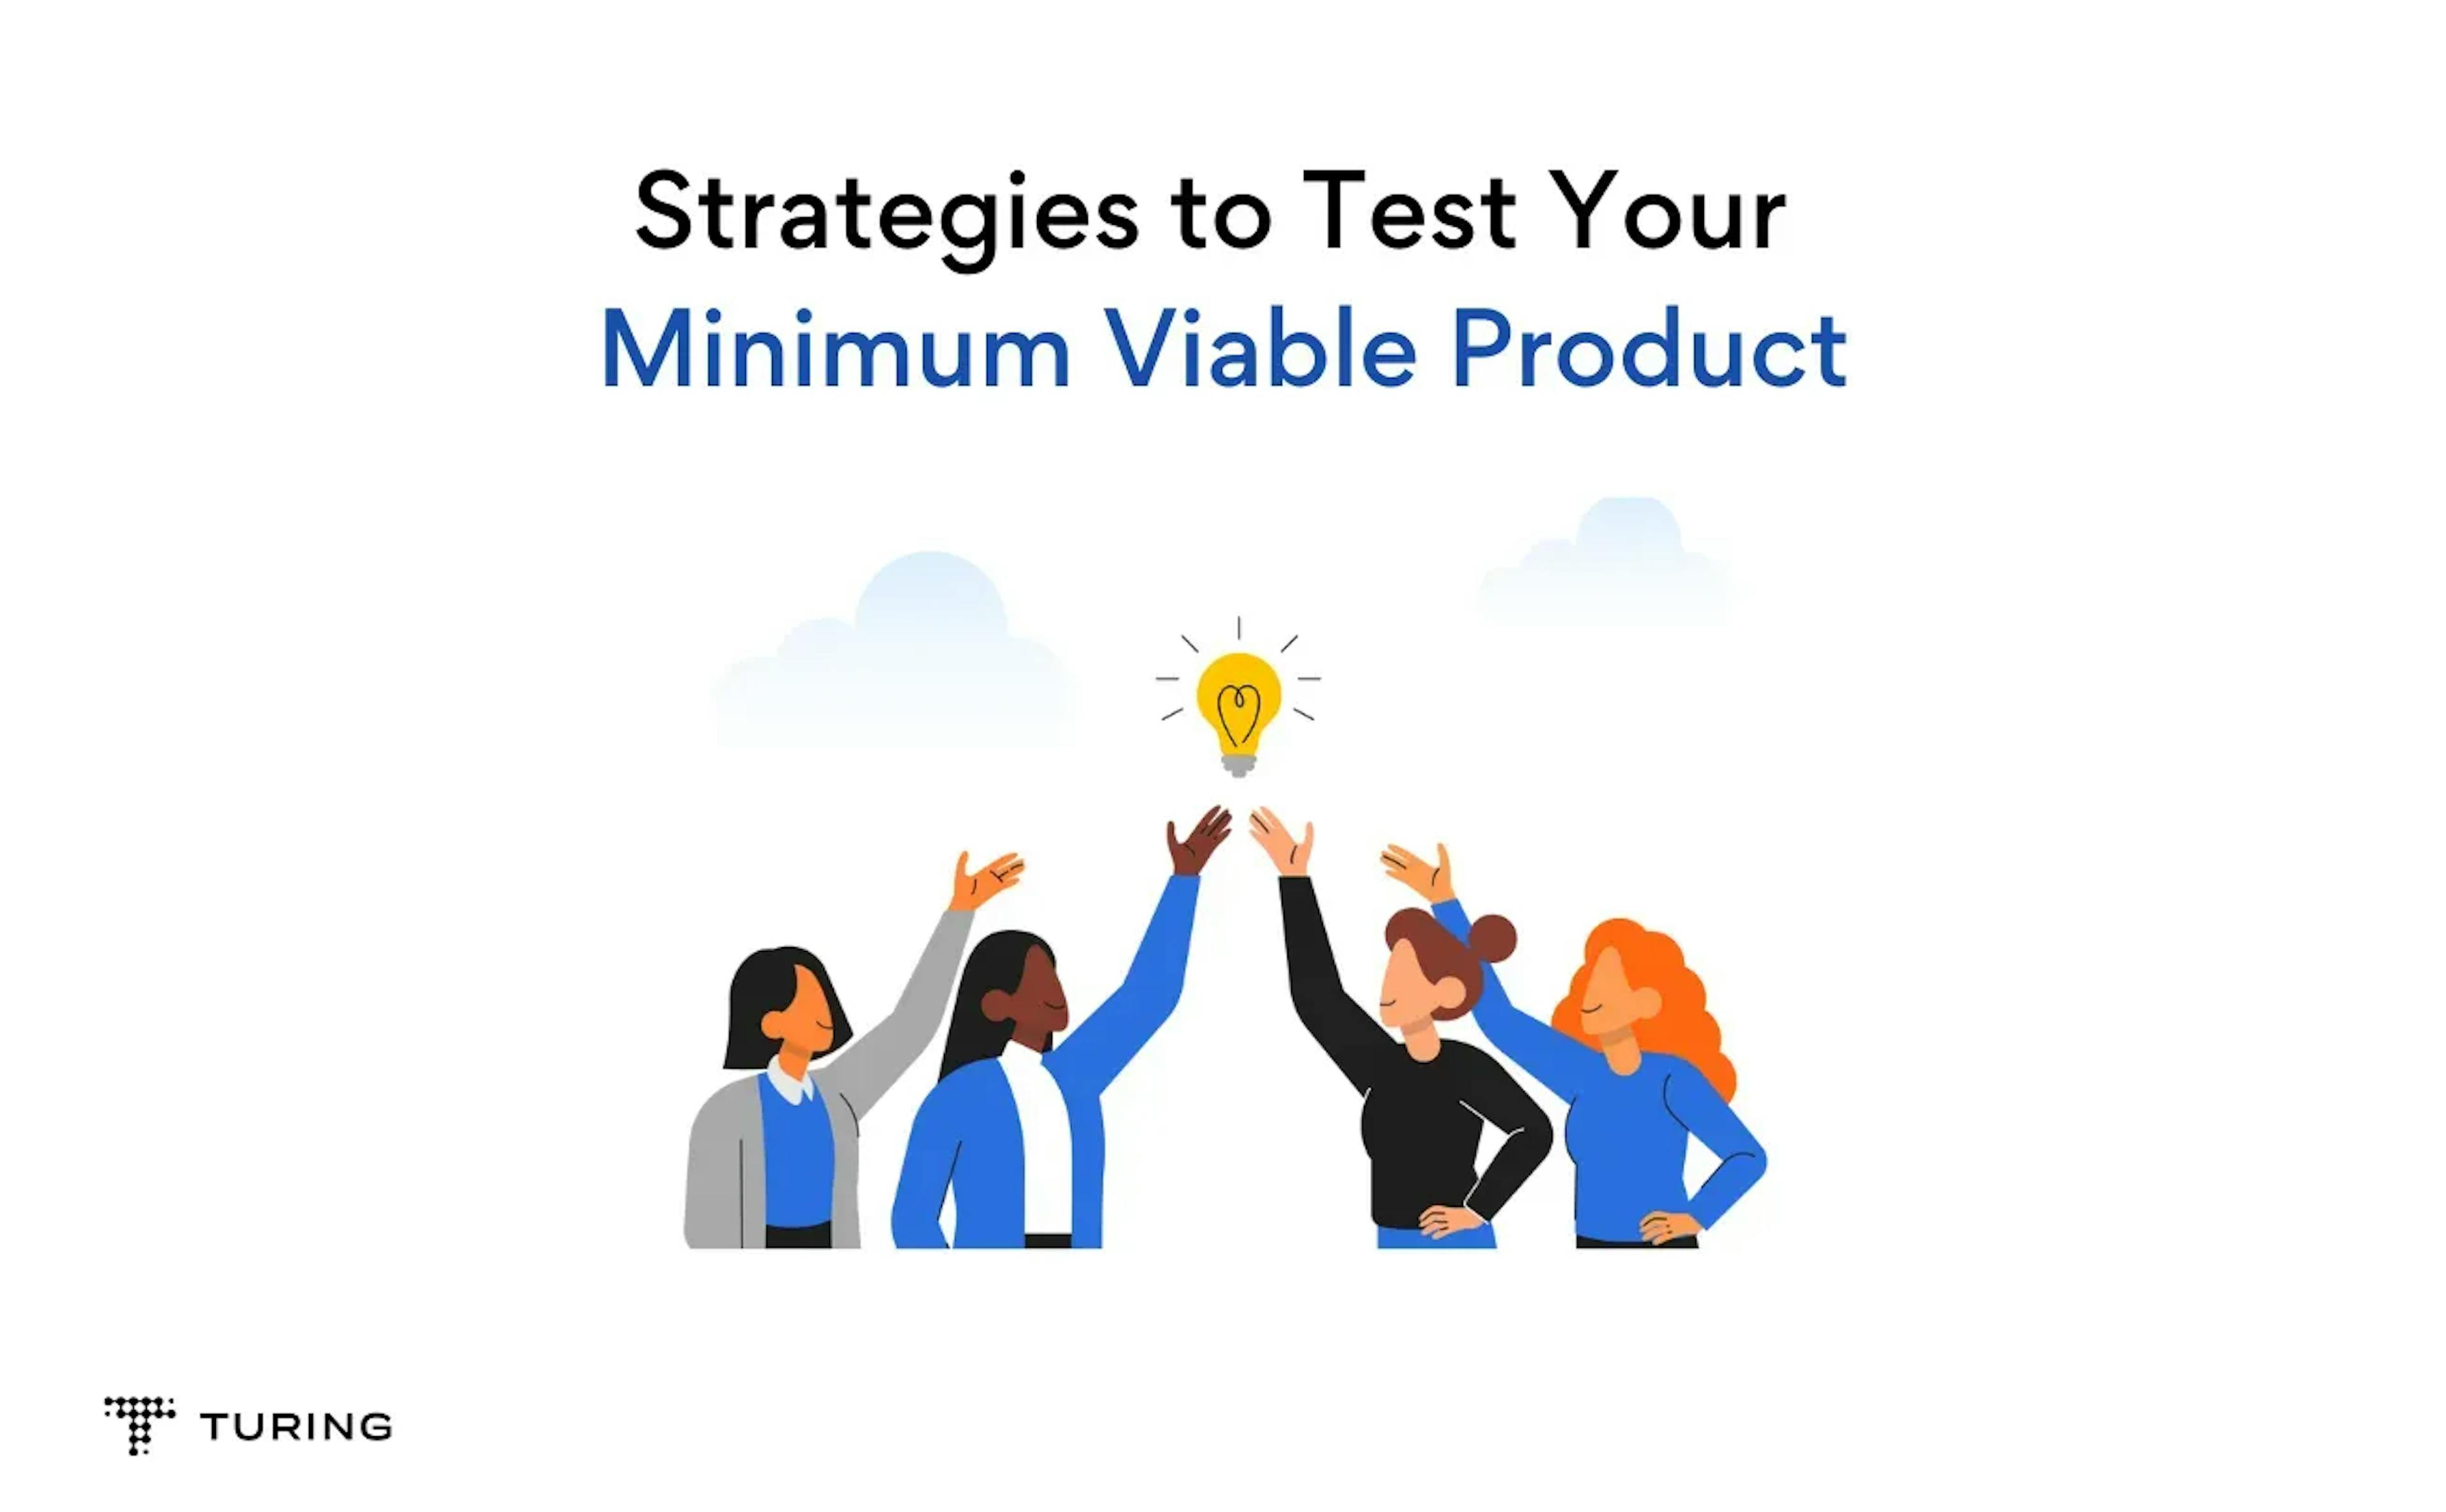 Strategies to Test Your Minimum Viable Product